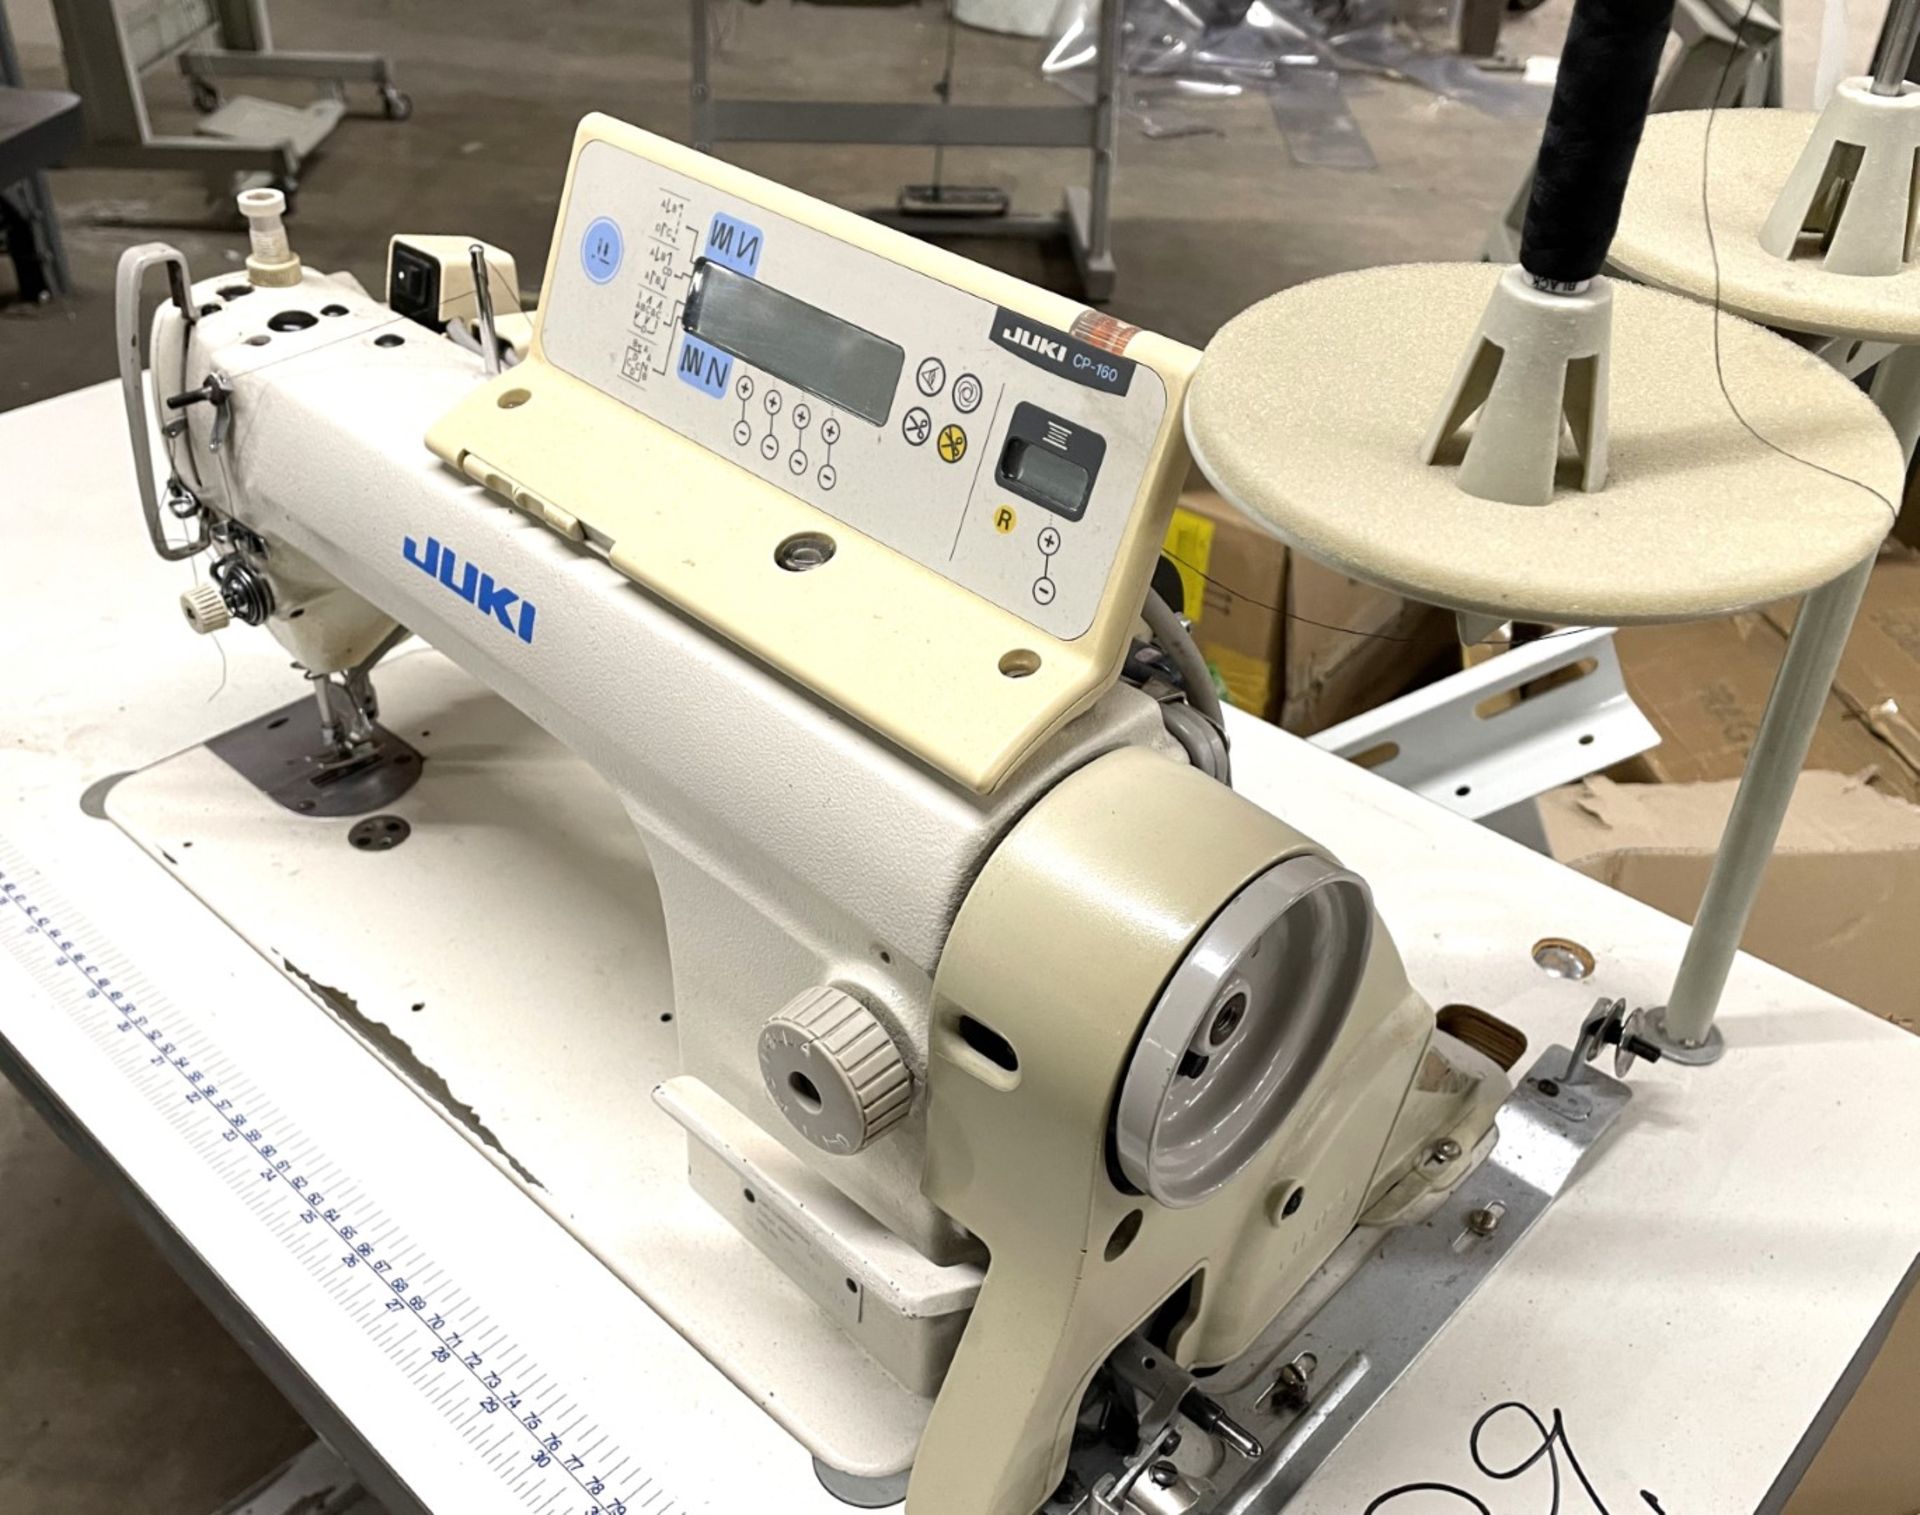 1 x Juki DDL850 Single Needle Automatic Lockstitch Industrial Sewing Machine With Table - Image 5 of 16